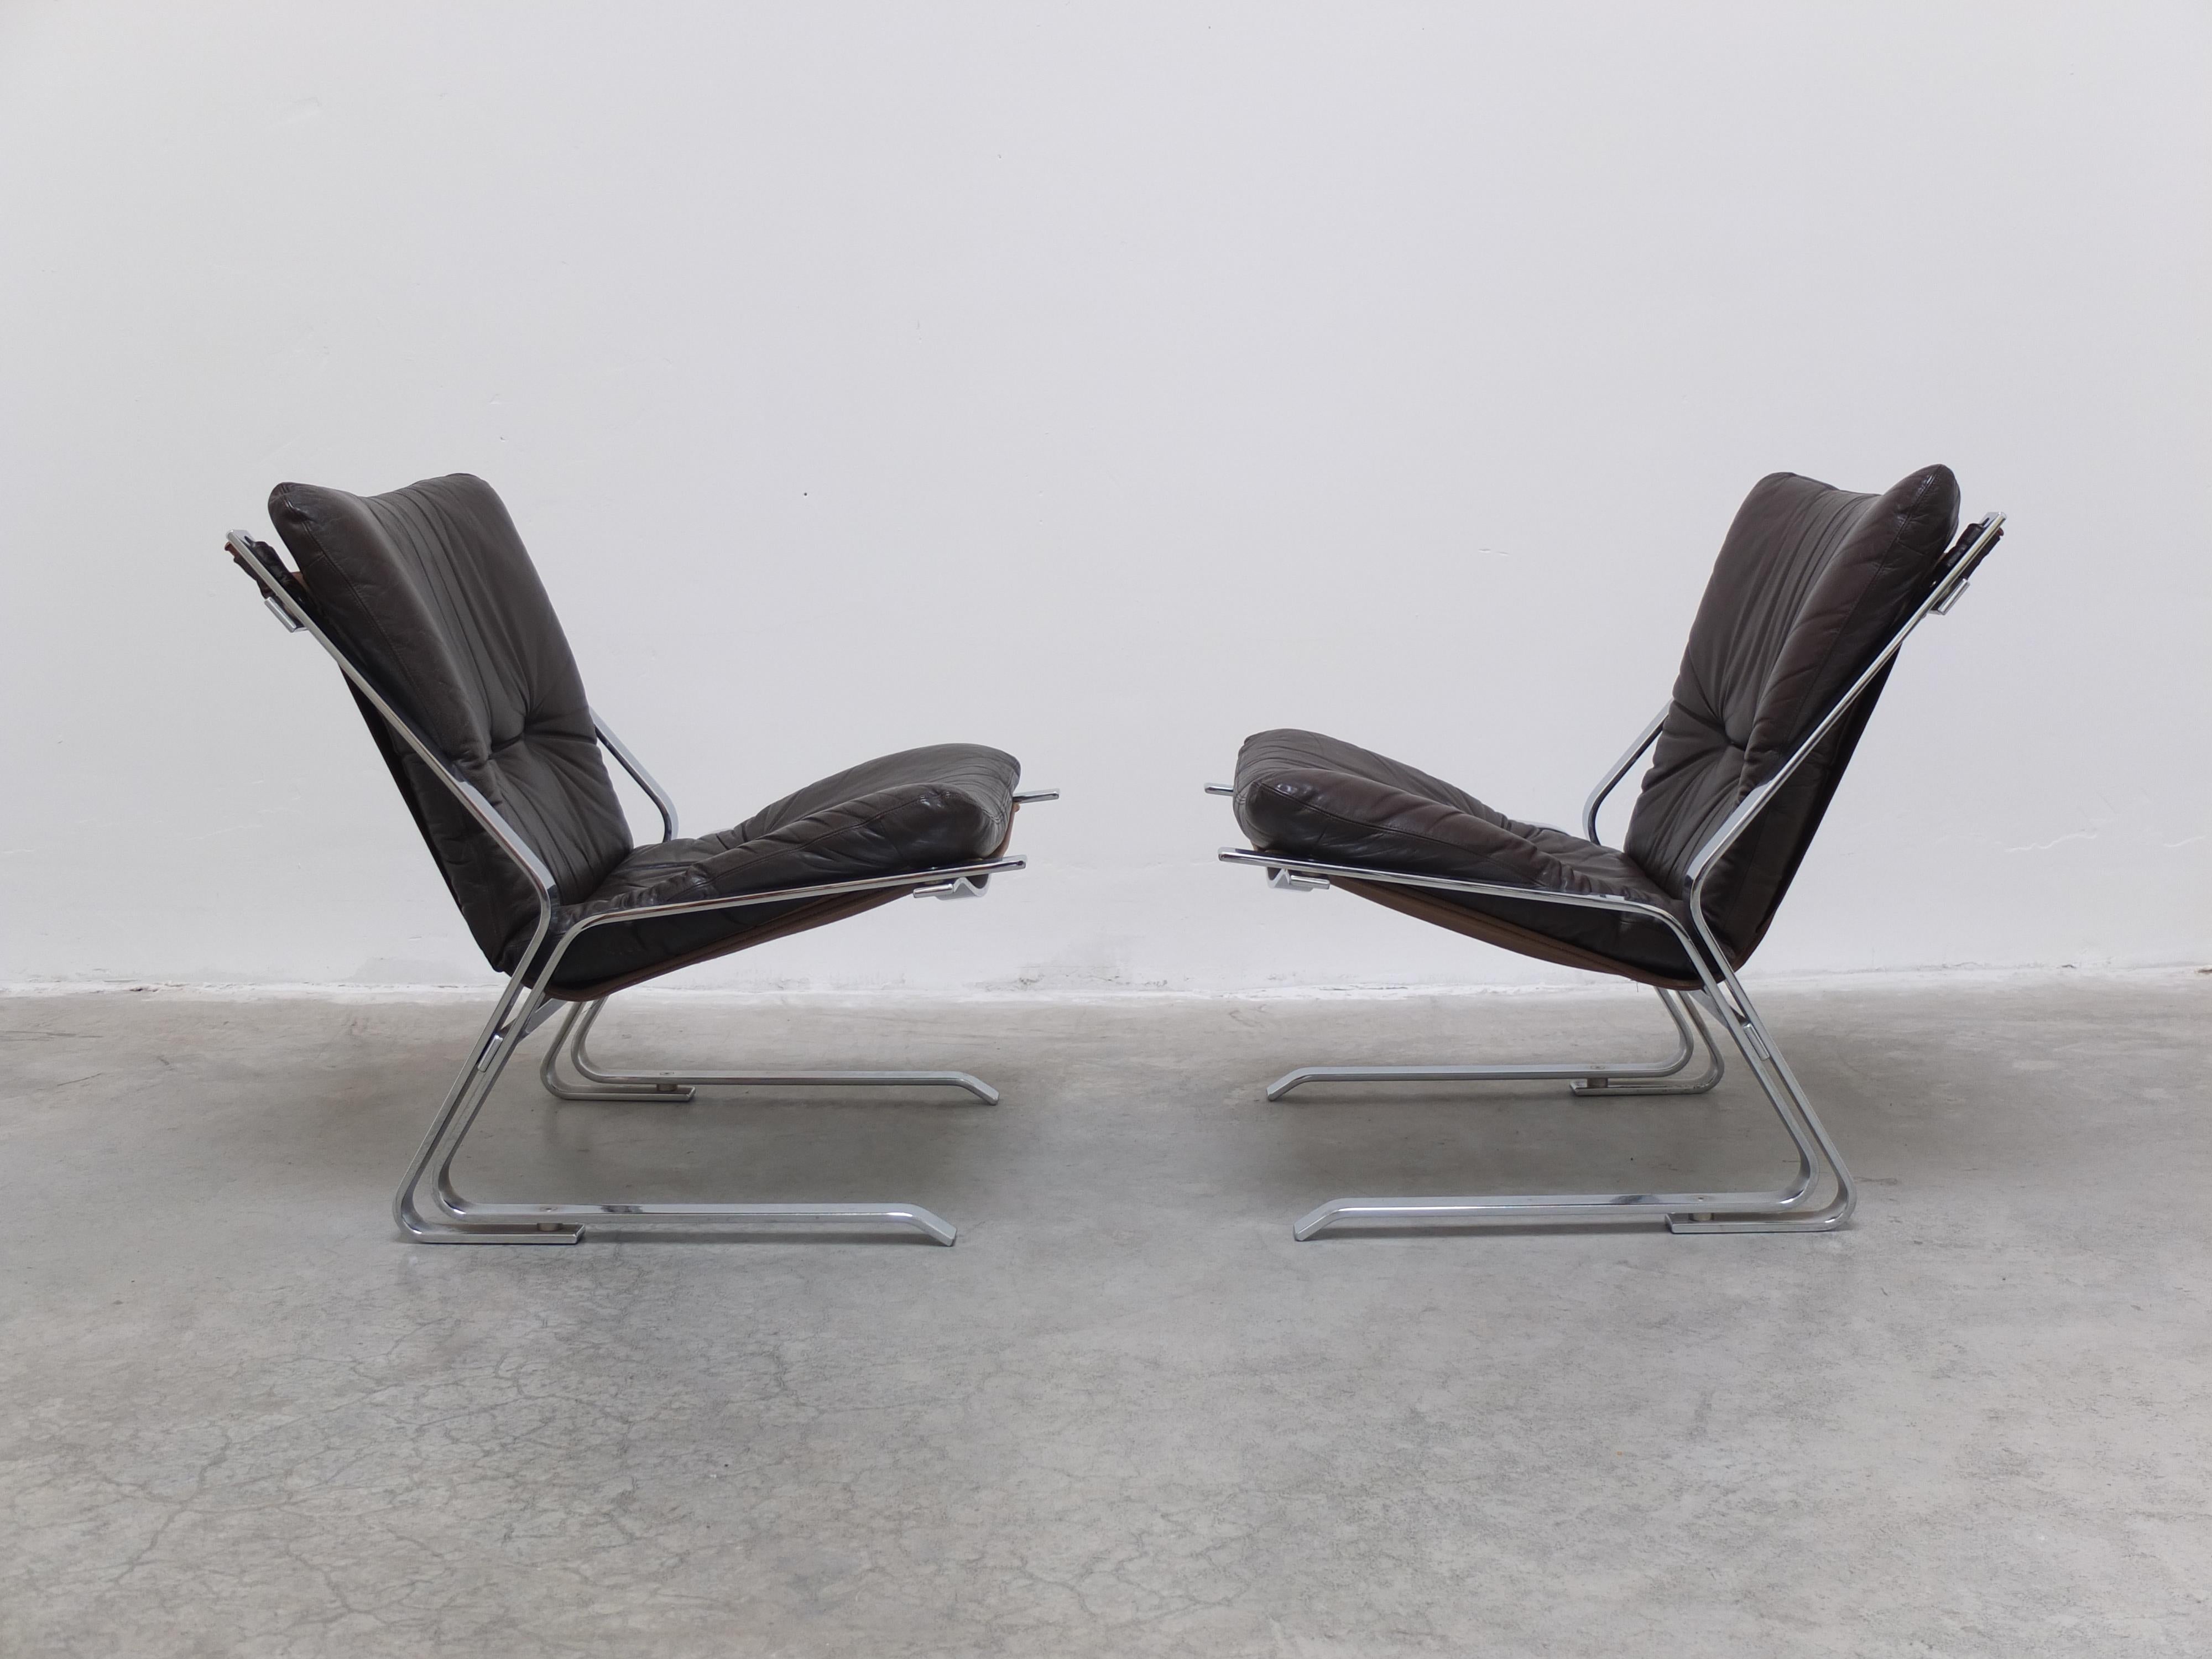 Rare Pair of 'Pirate' Lounge Chairs by Elsa & Nordahl Solheim for Rykken, 1960s For Sale 3